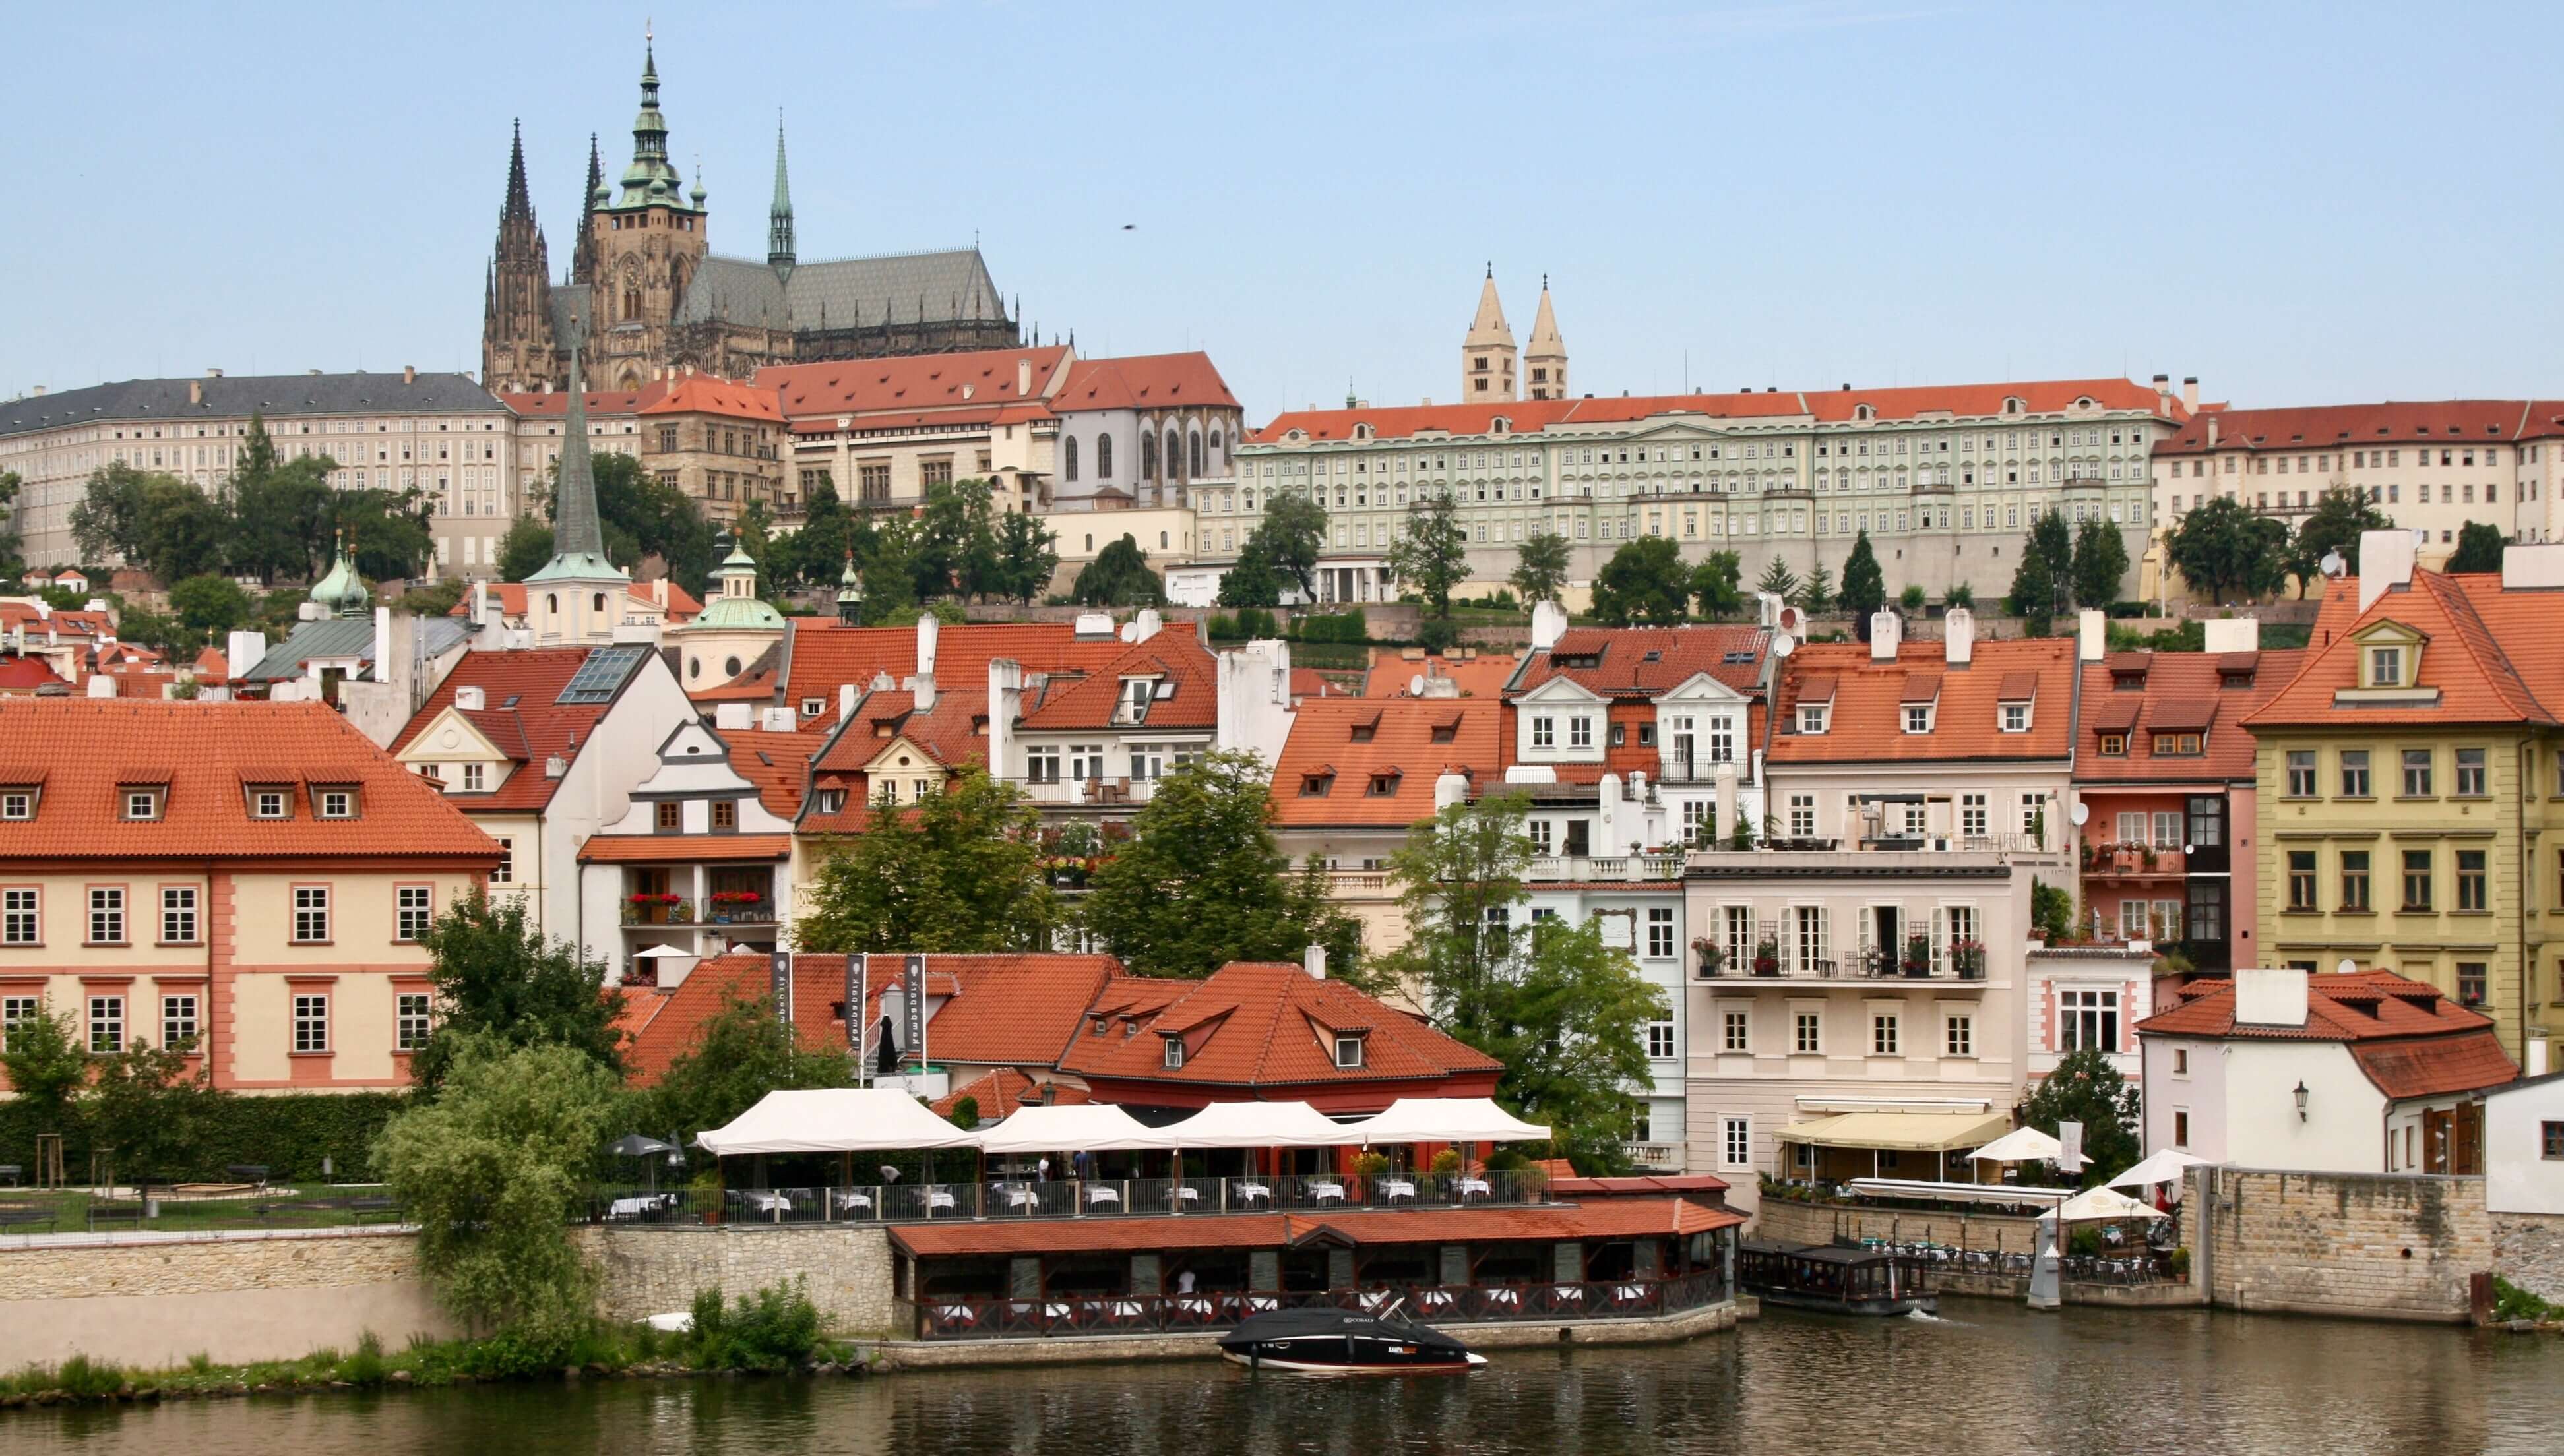 Our incredible journey to Prague